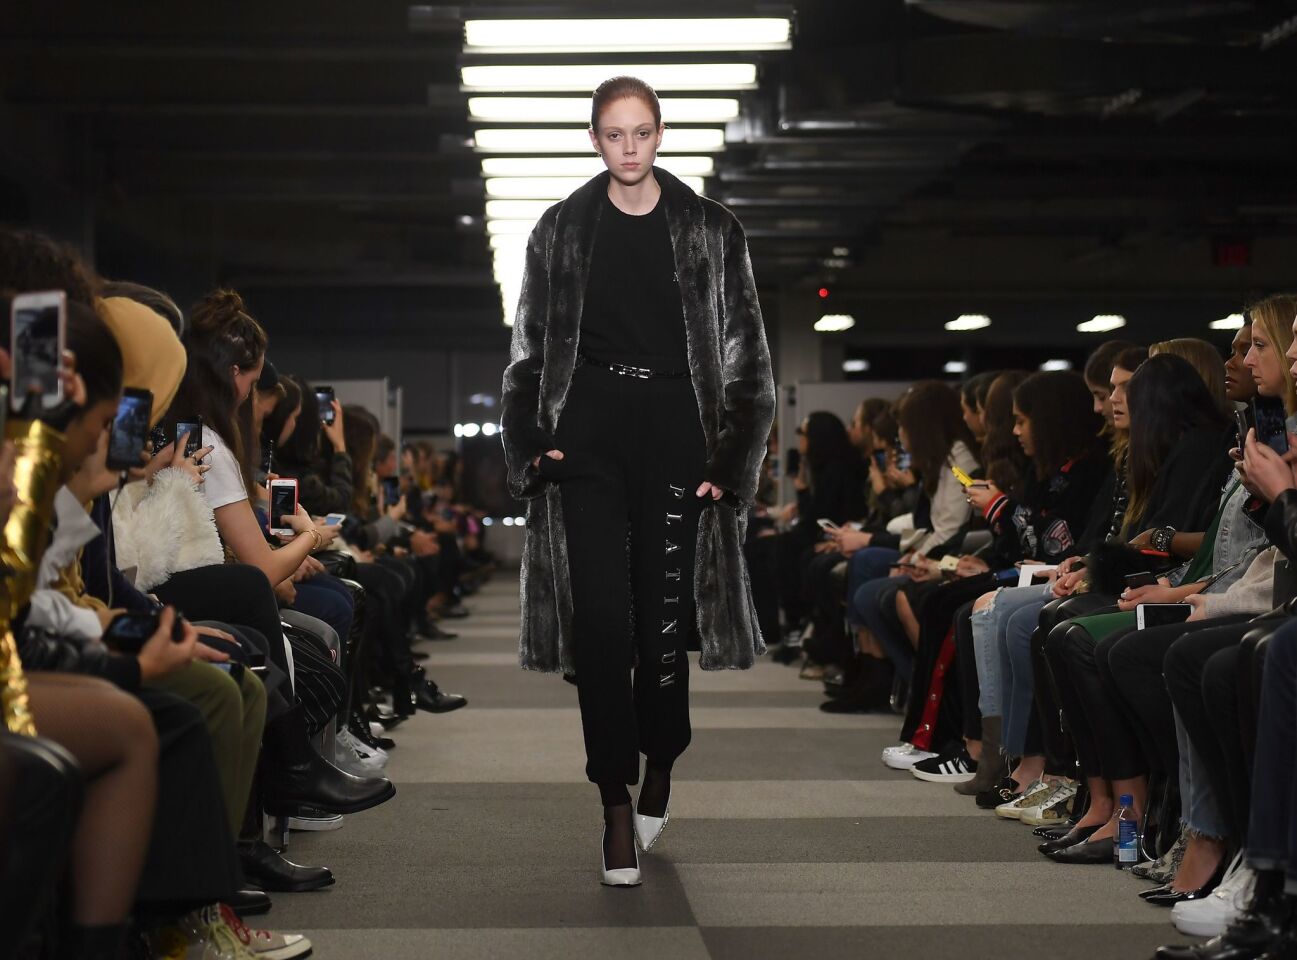 A look from Alexander Wang's fall/winter 2018 runway collection presented on Saturday during New York Fashion Week.